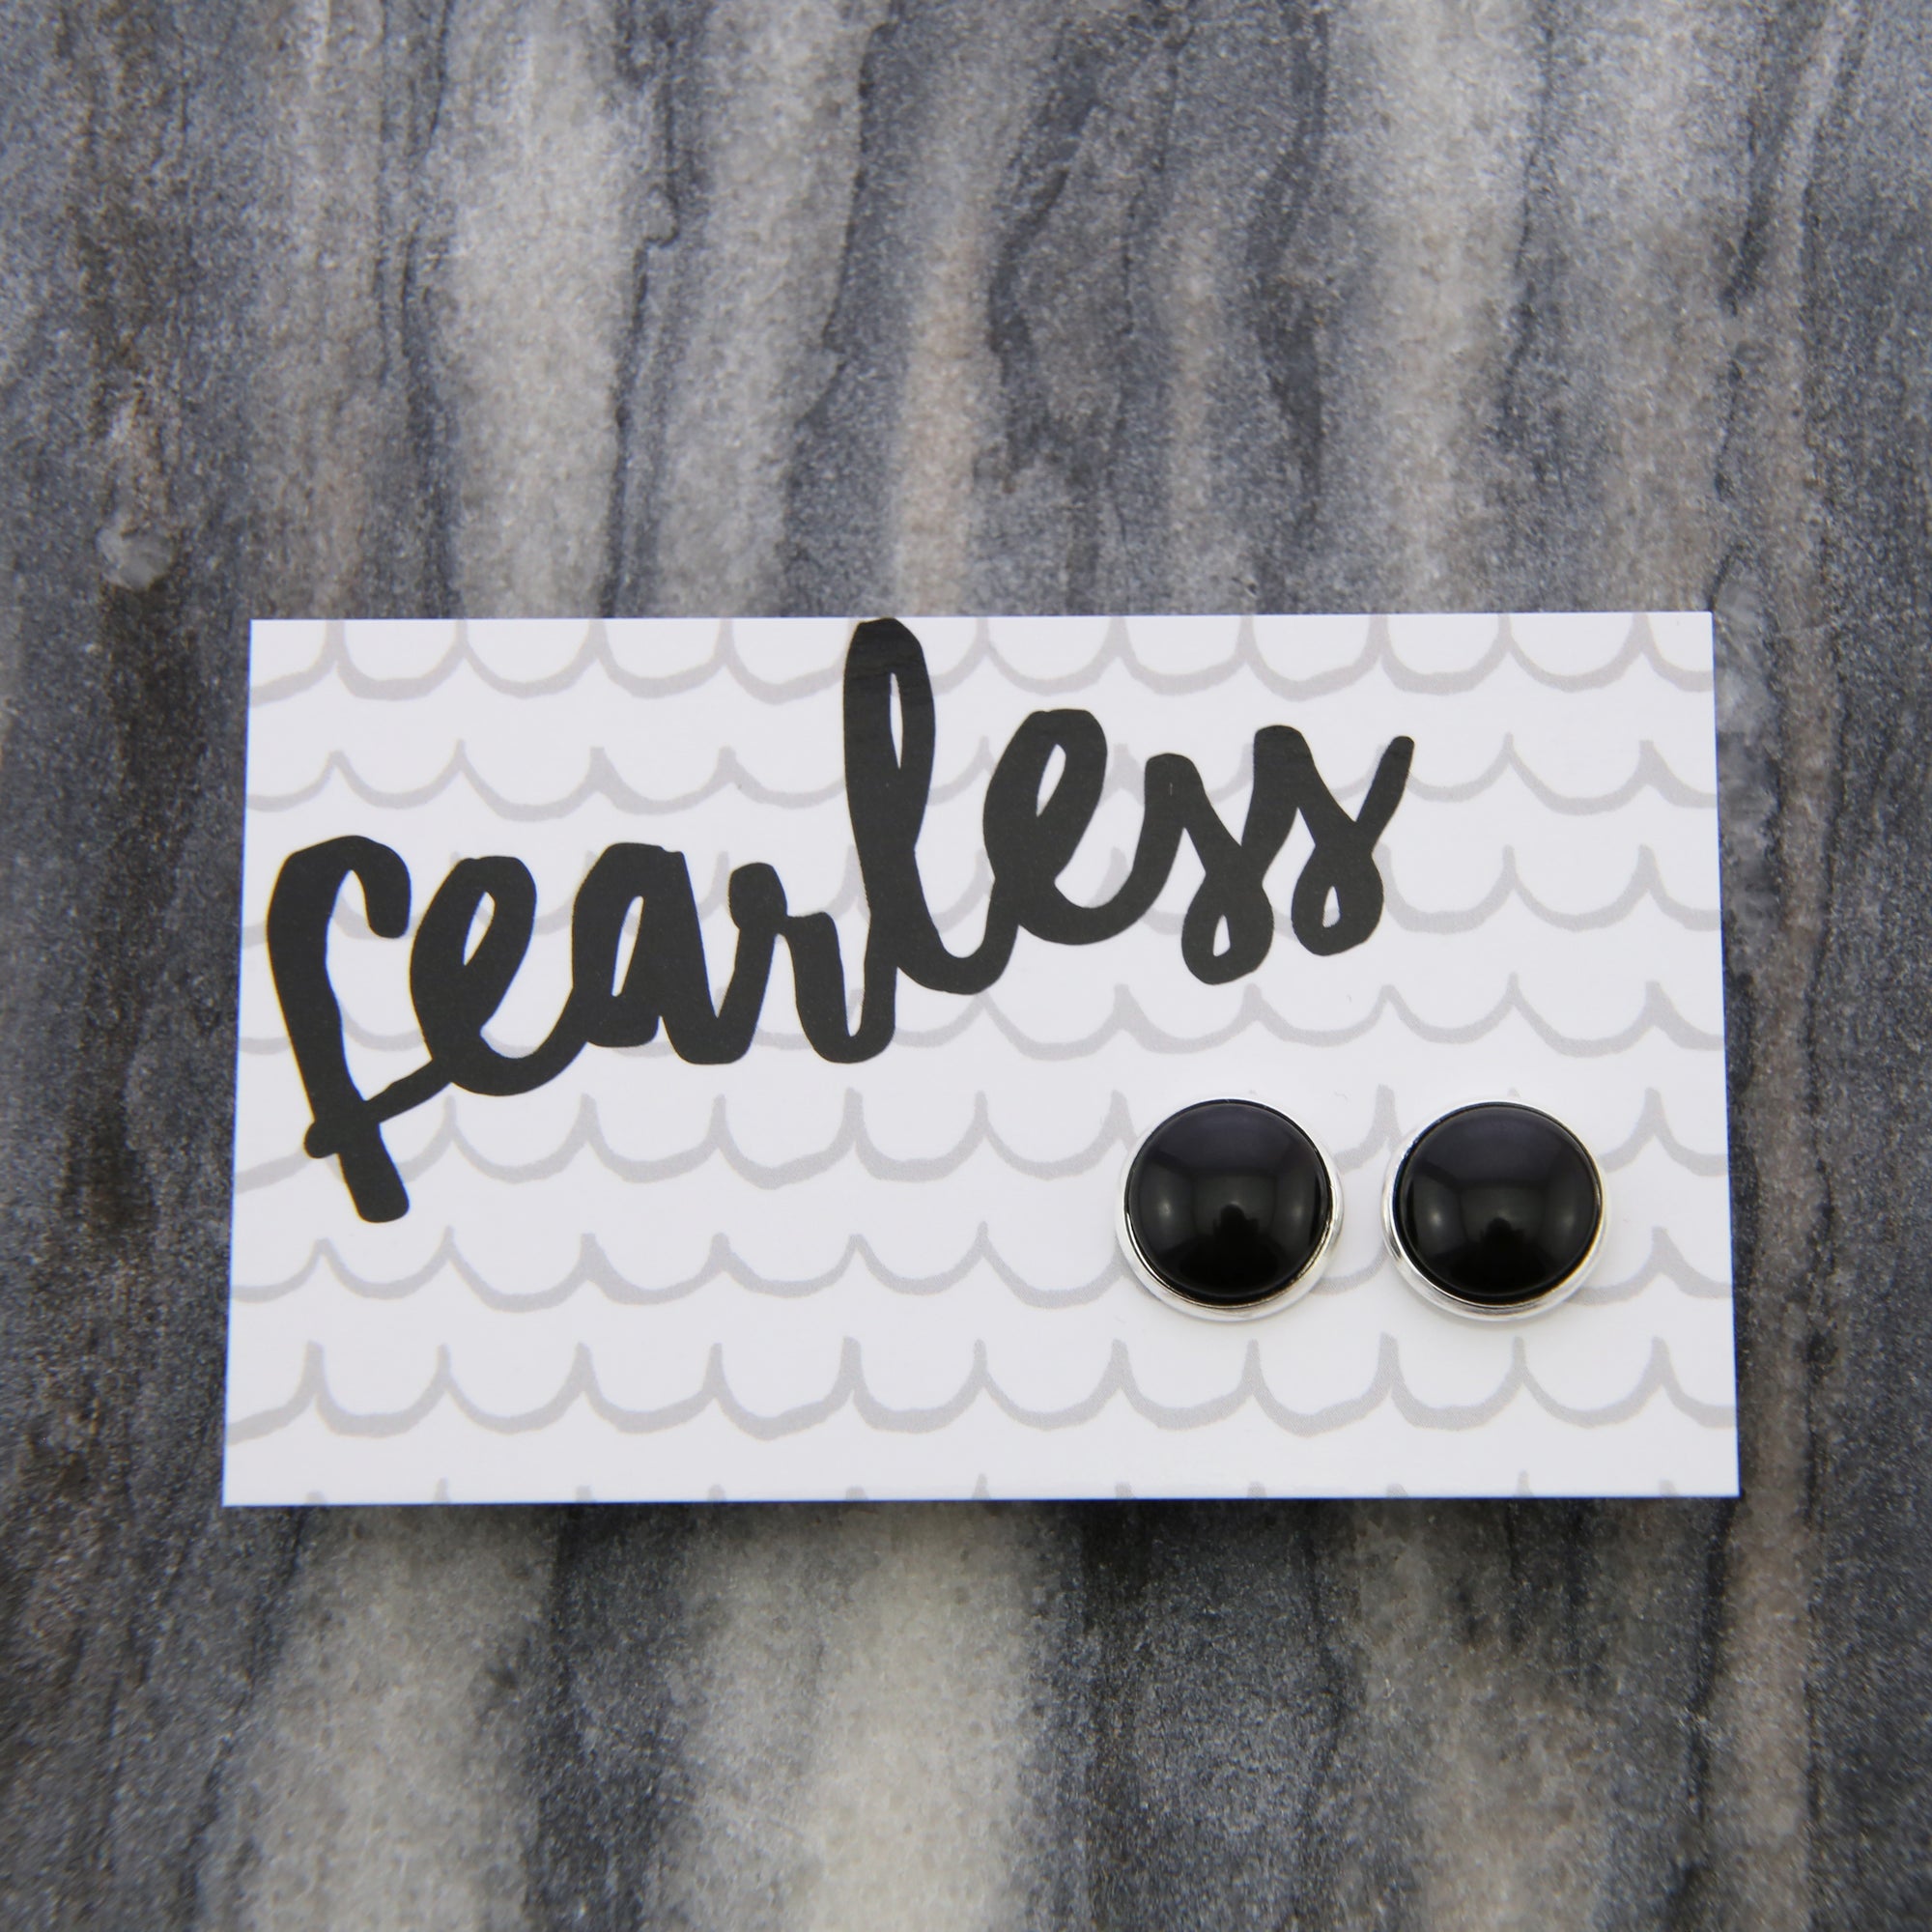 Fearless - Bright Silver 12mm Circle Studs - Black Resin (8916-F)